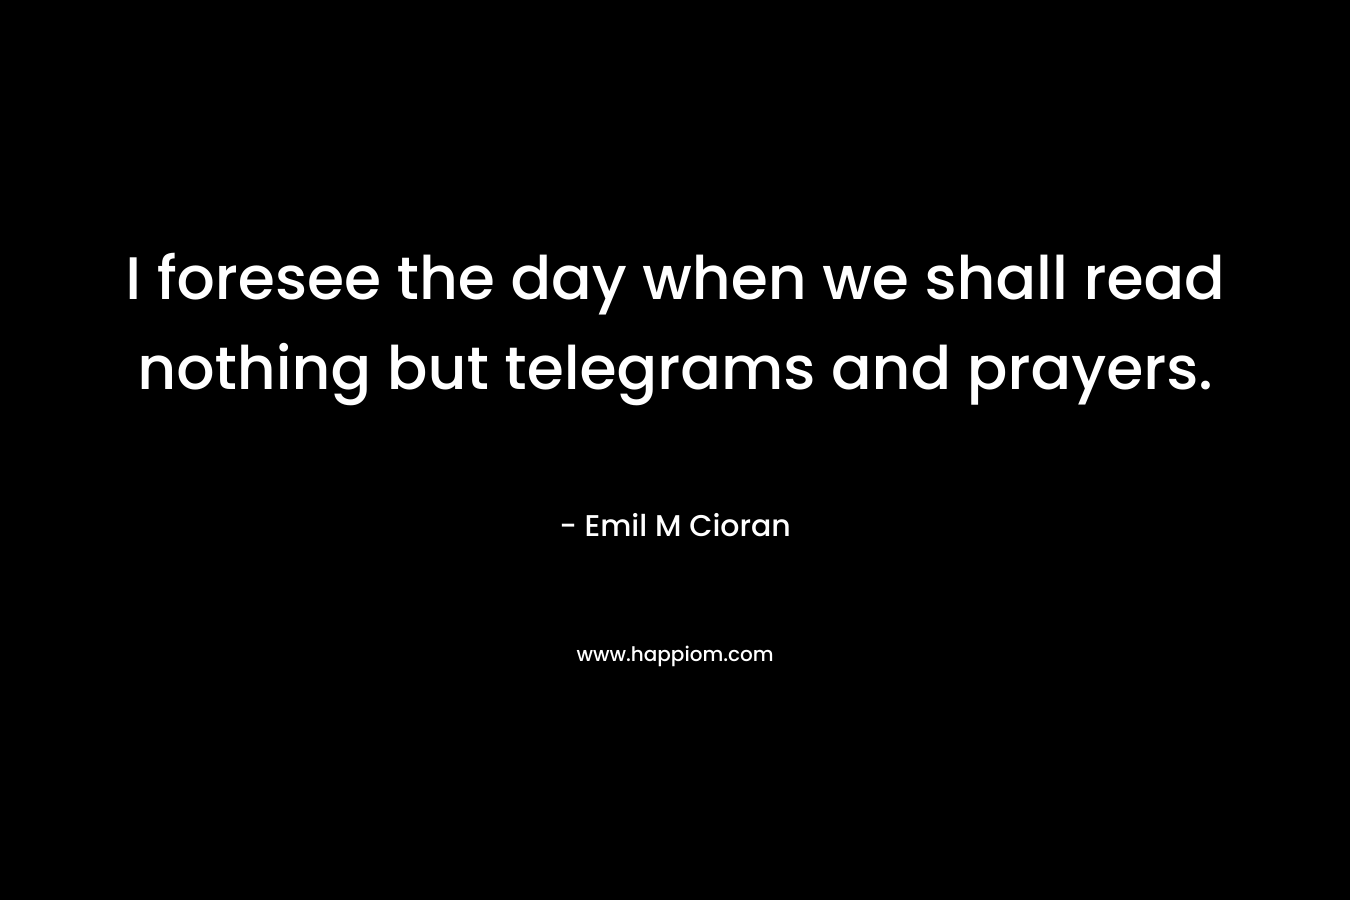 I foresee the day when we shall read nothing but telegrams and prayers. – Emil M Cioran